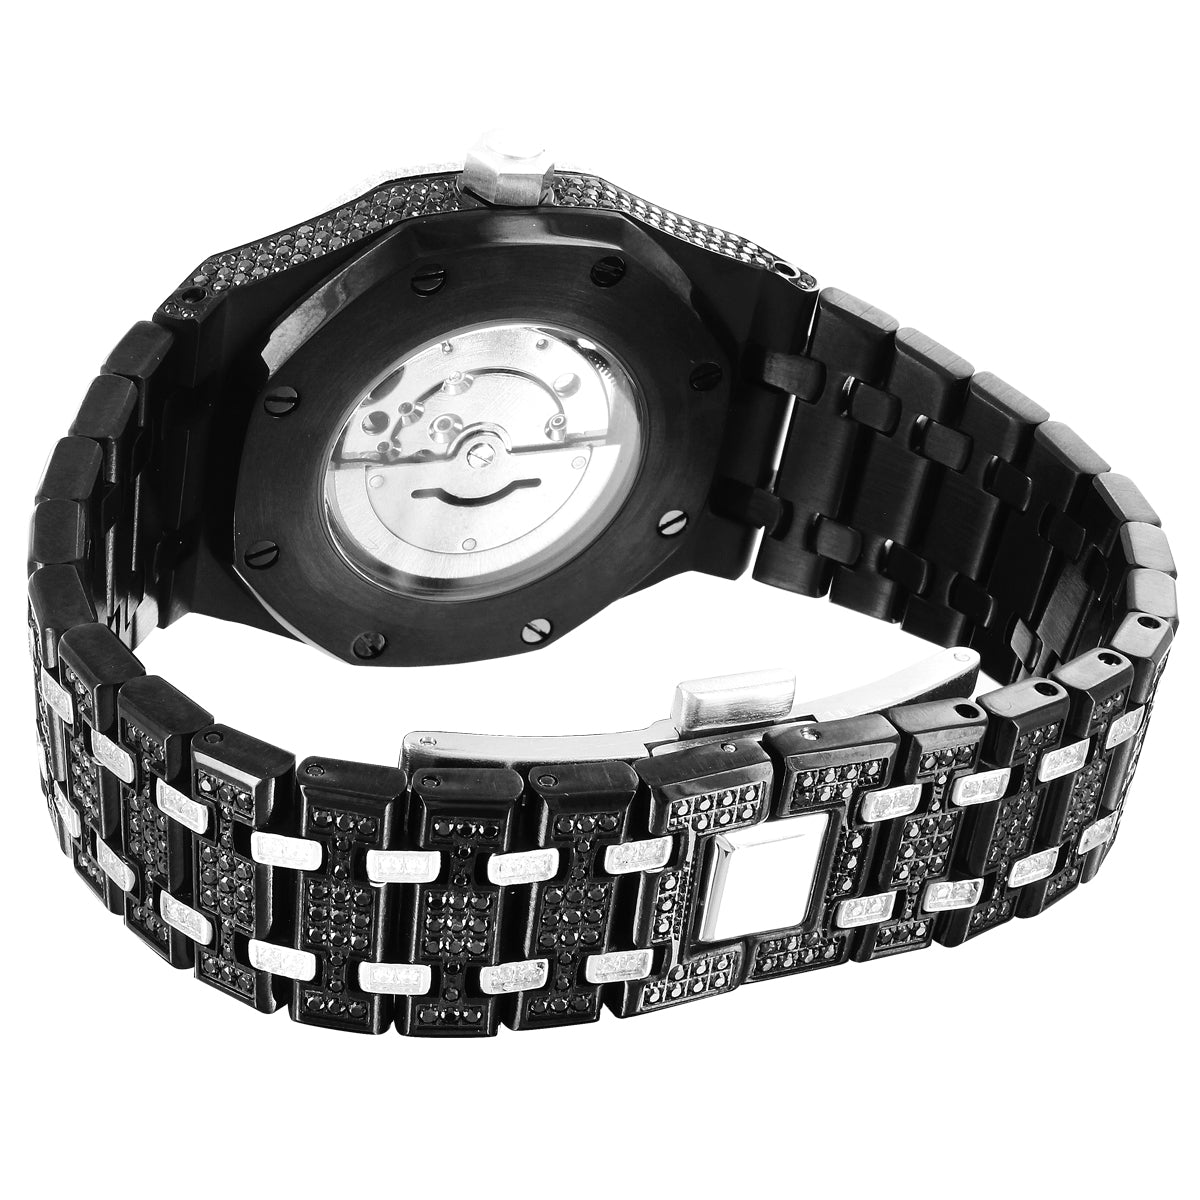 Stainless Steel Black Men's Bling Automatic Movement Watch